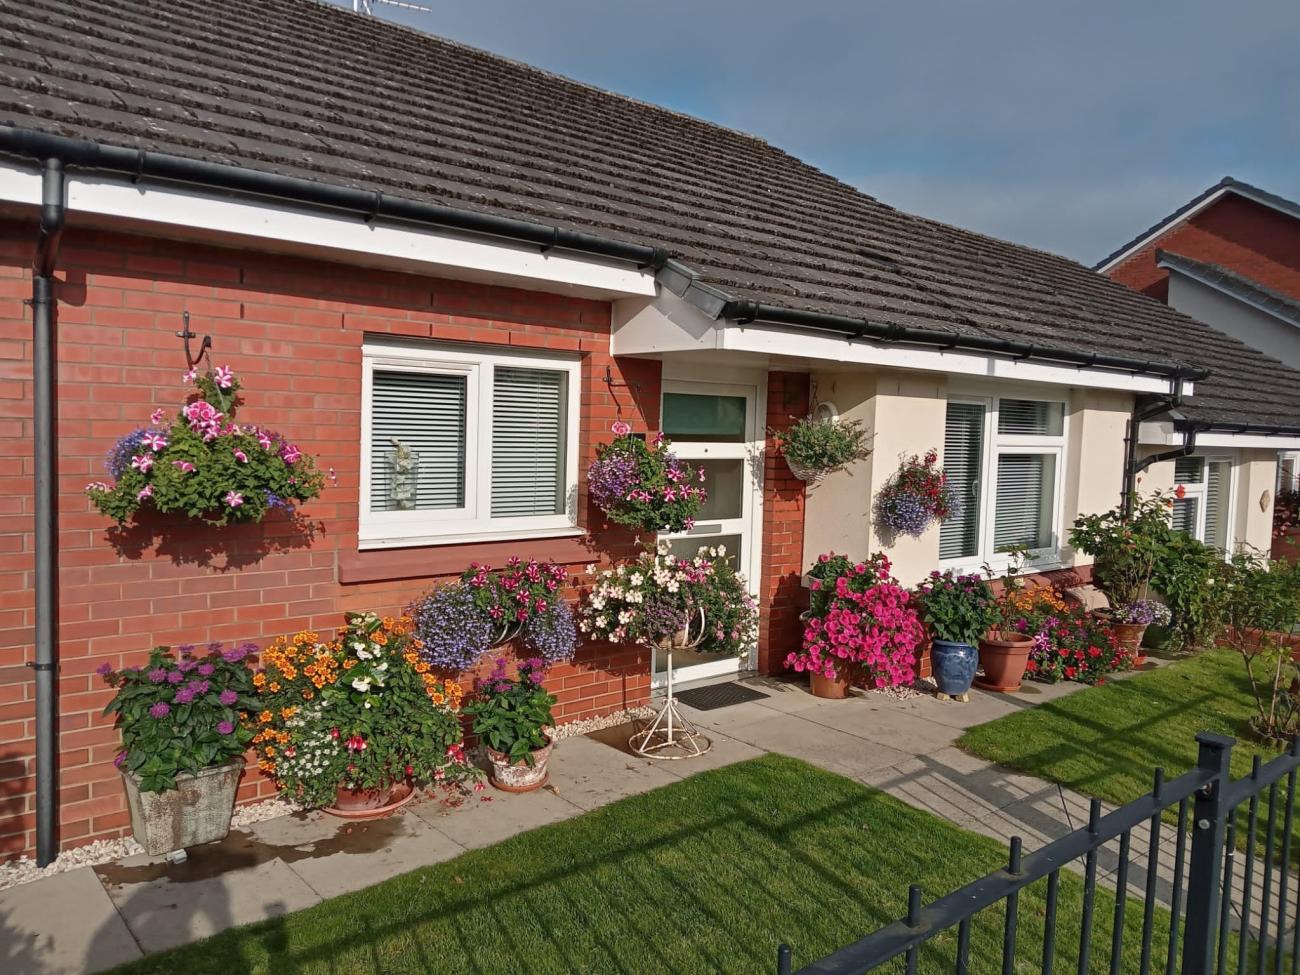 House with colourful garden display